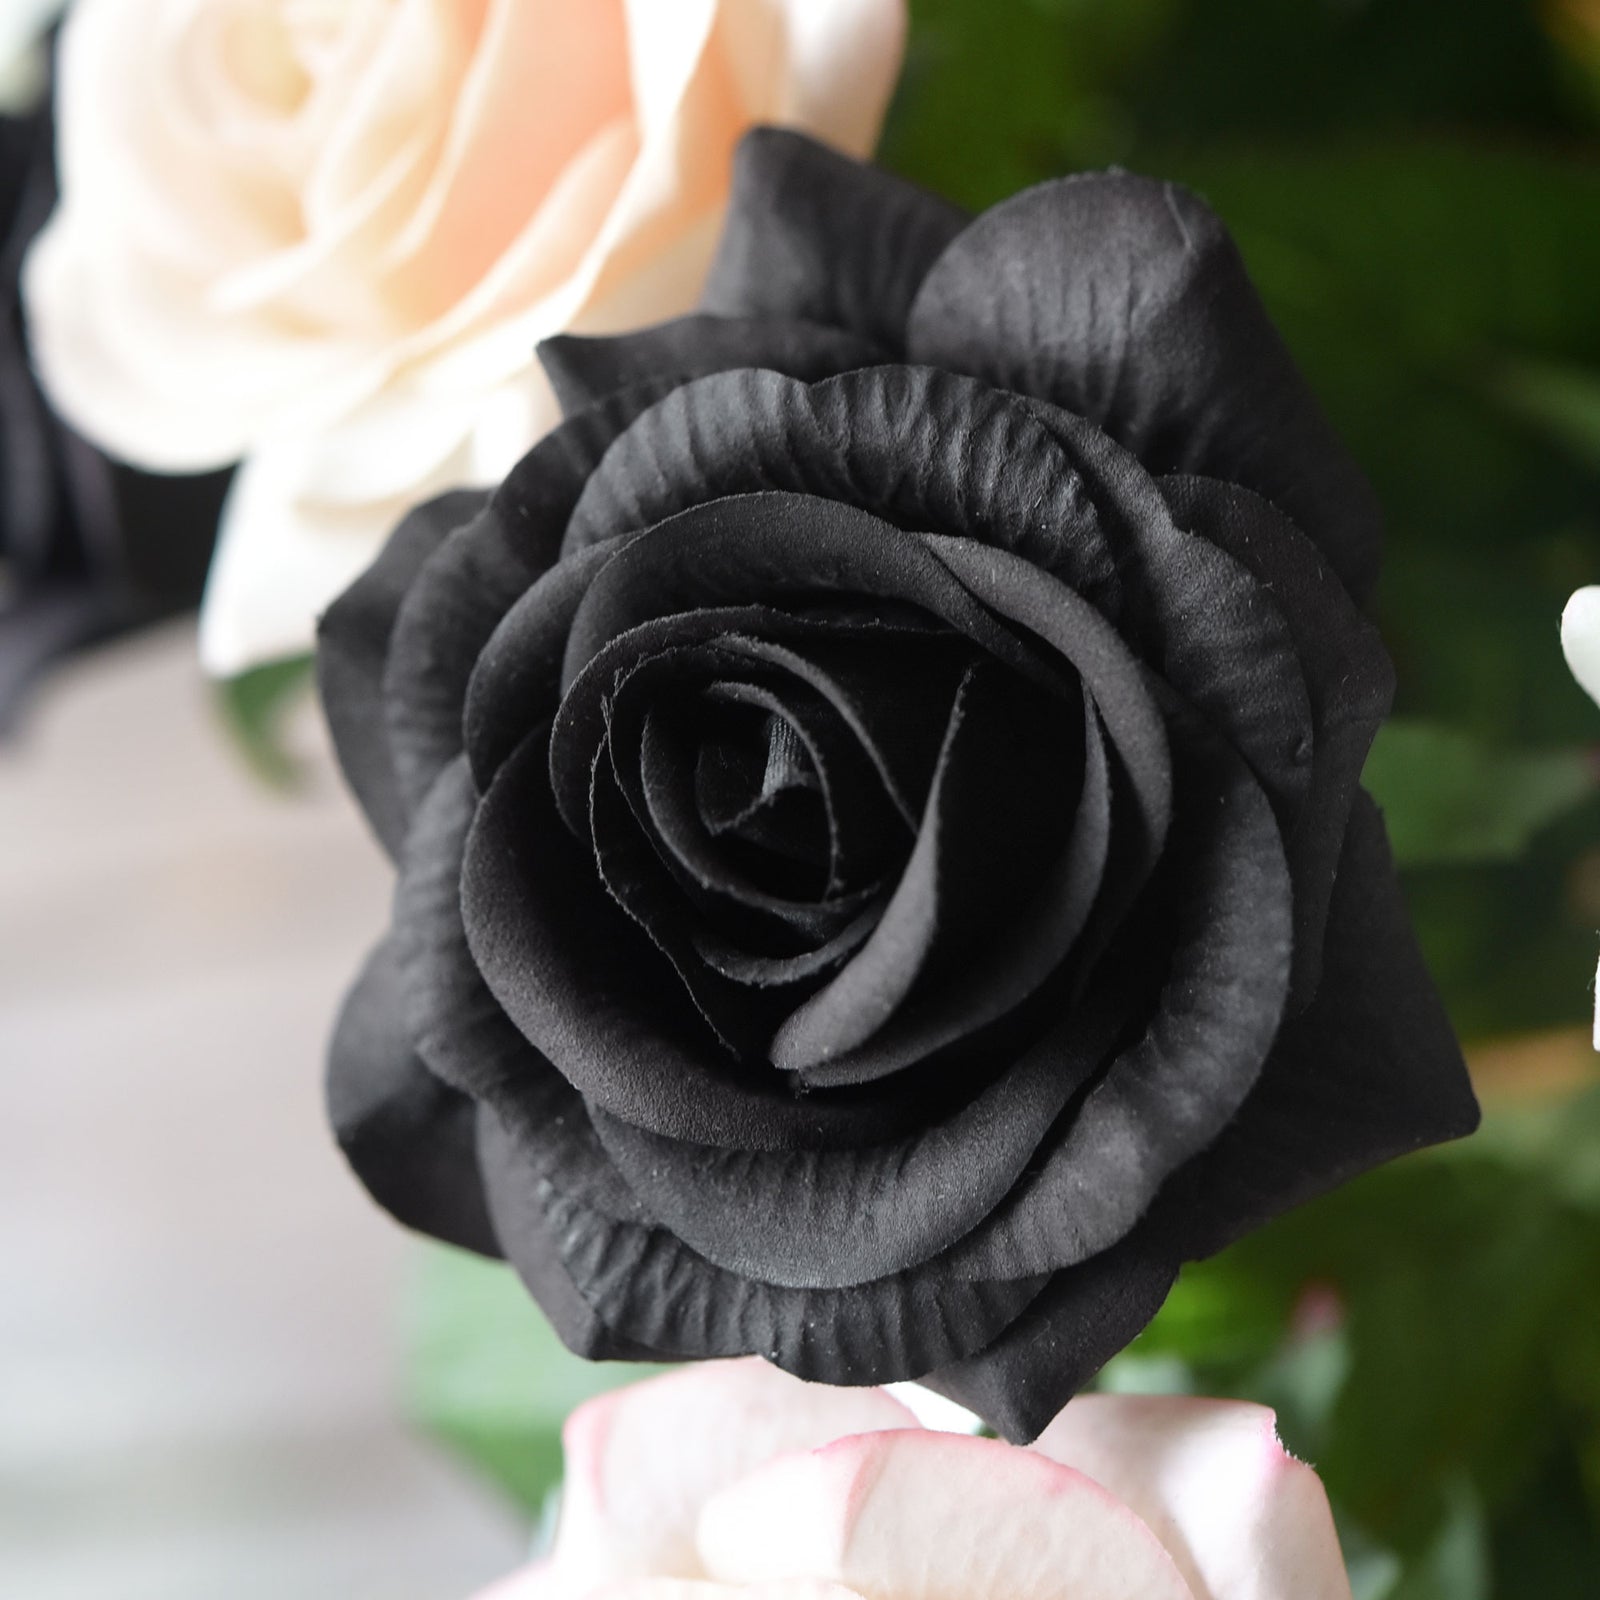 Real Touch 10 Stems Black Silk Artificial Roses Flowers ‘Petals Feel and Look like Fresh Roses